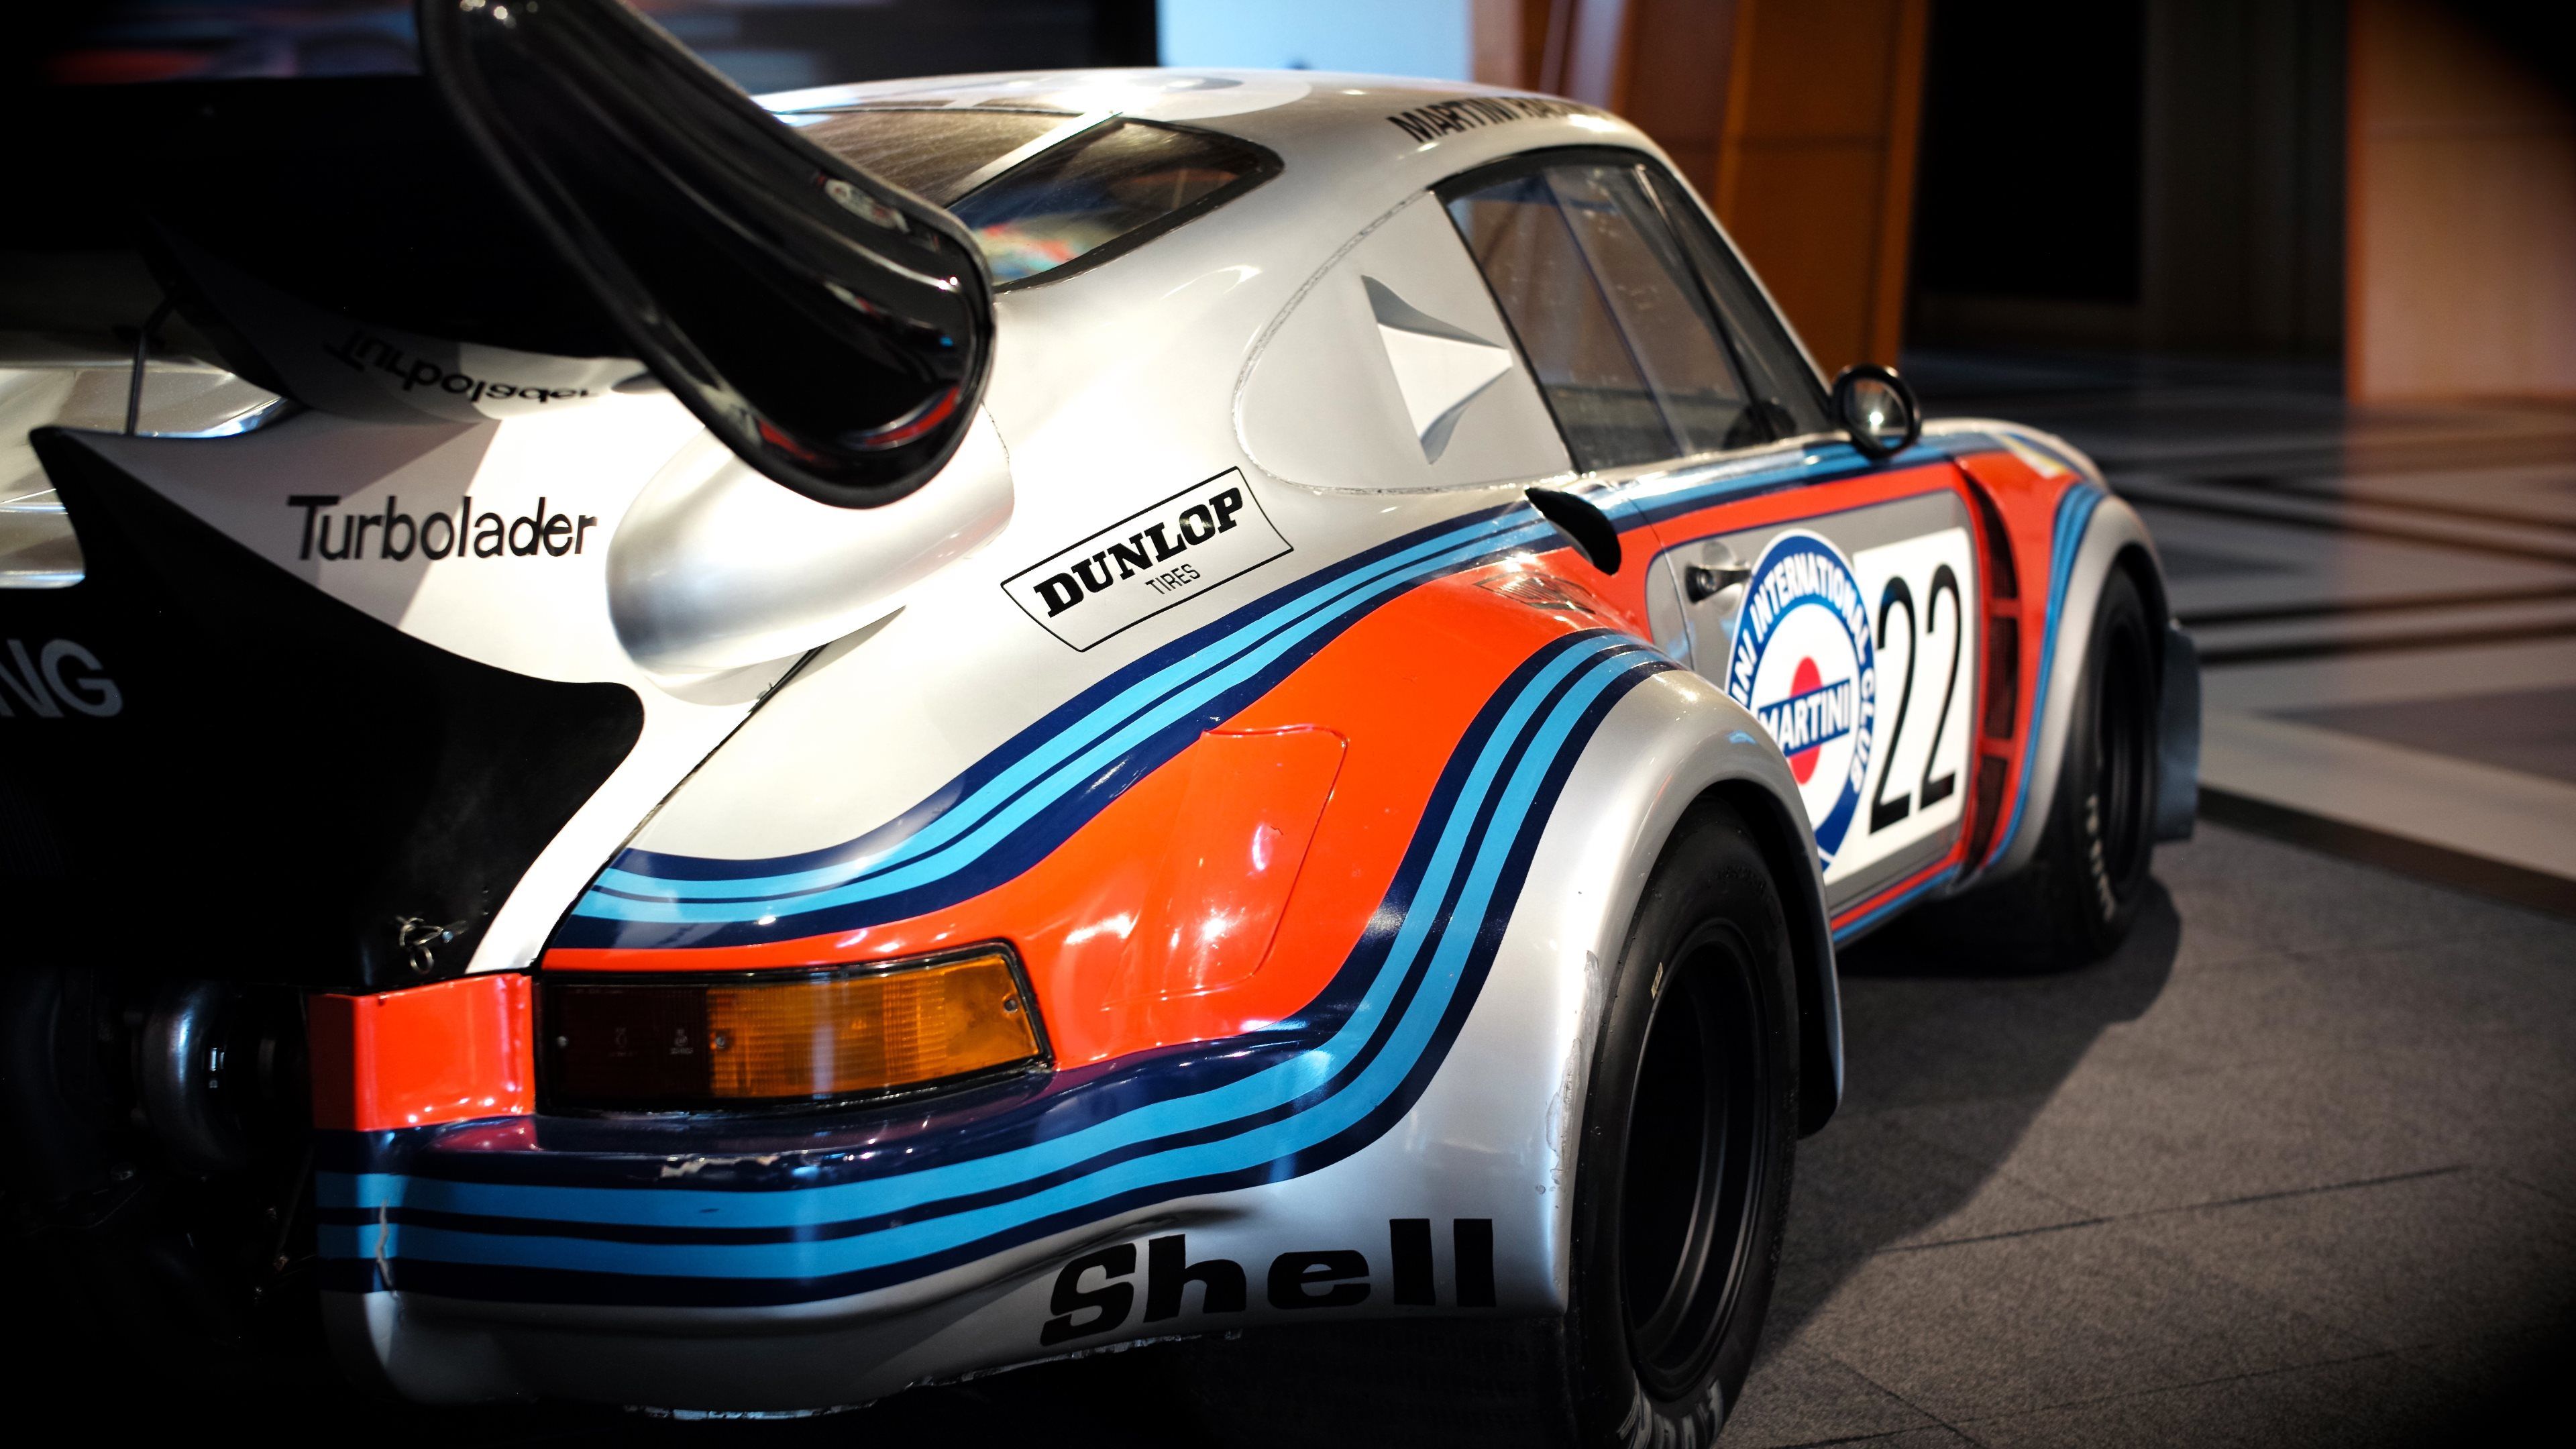 heres a 4k Porsche 935 turbo wallpaper for your high res pleasure